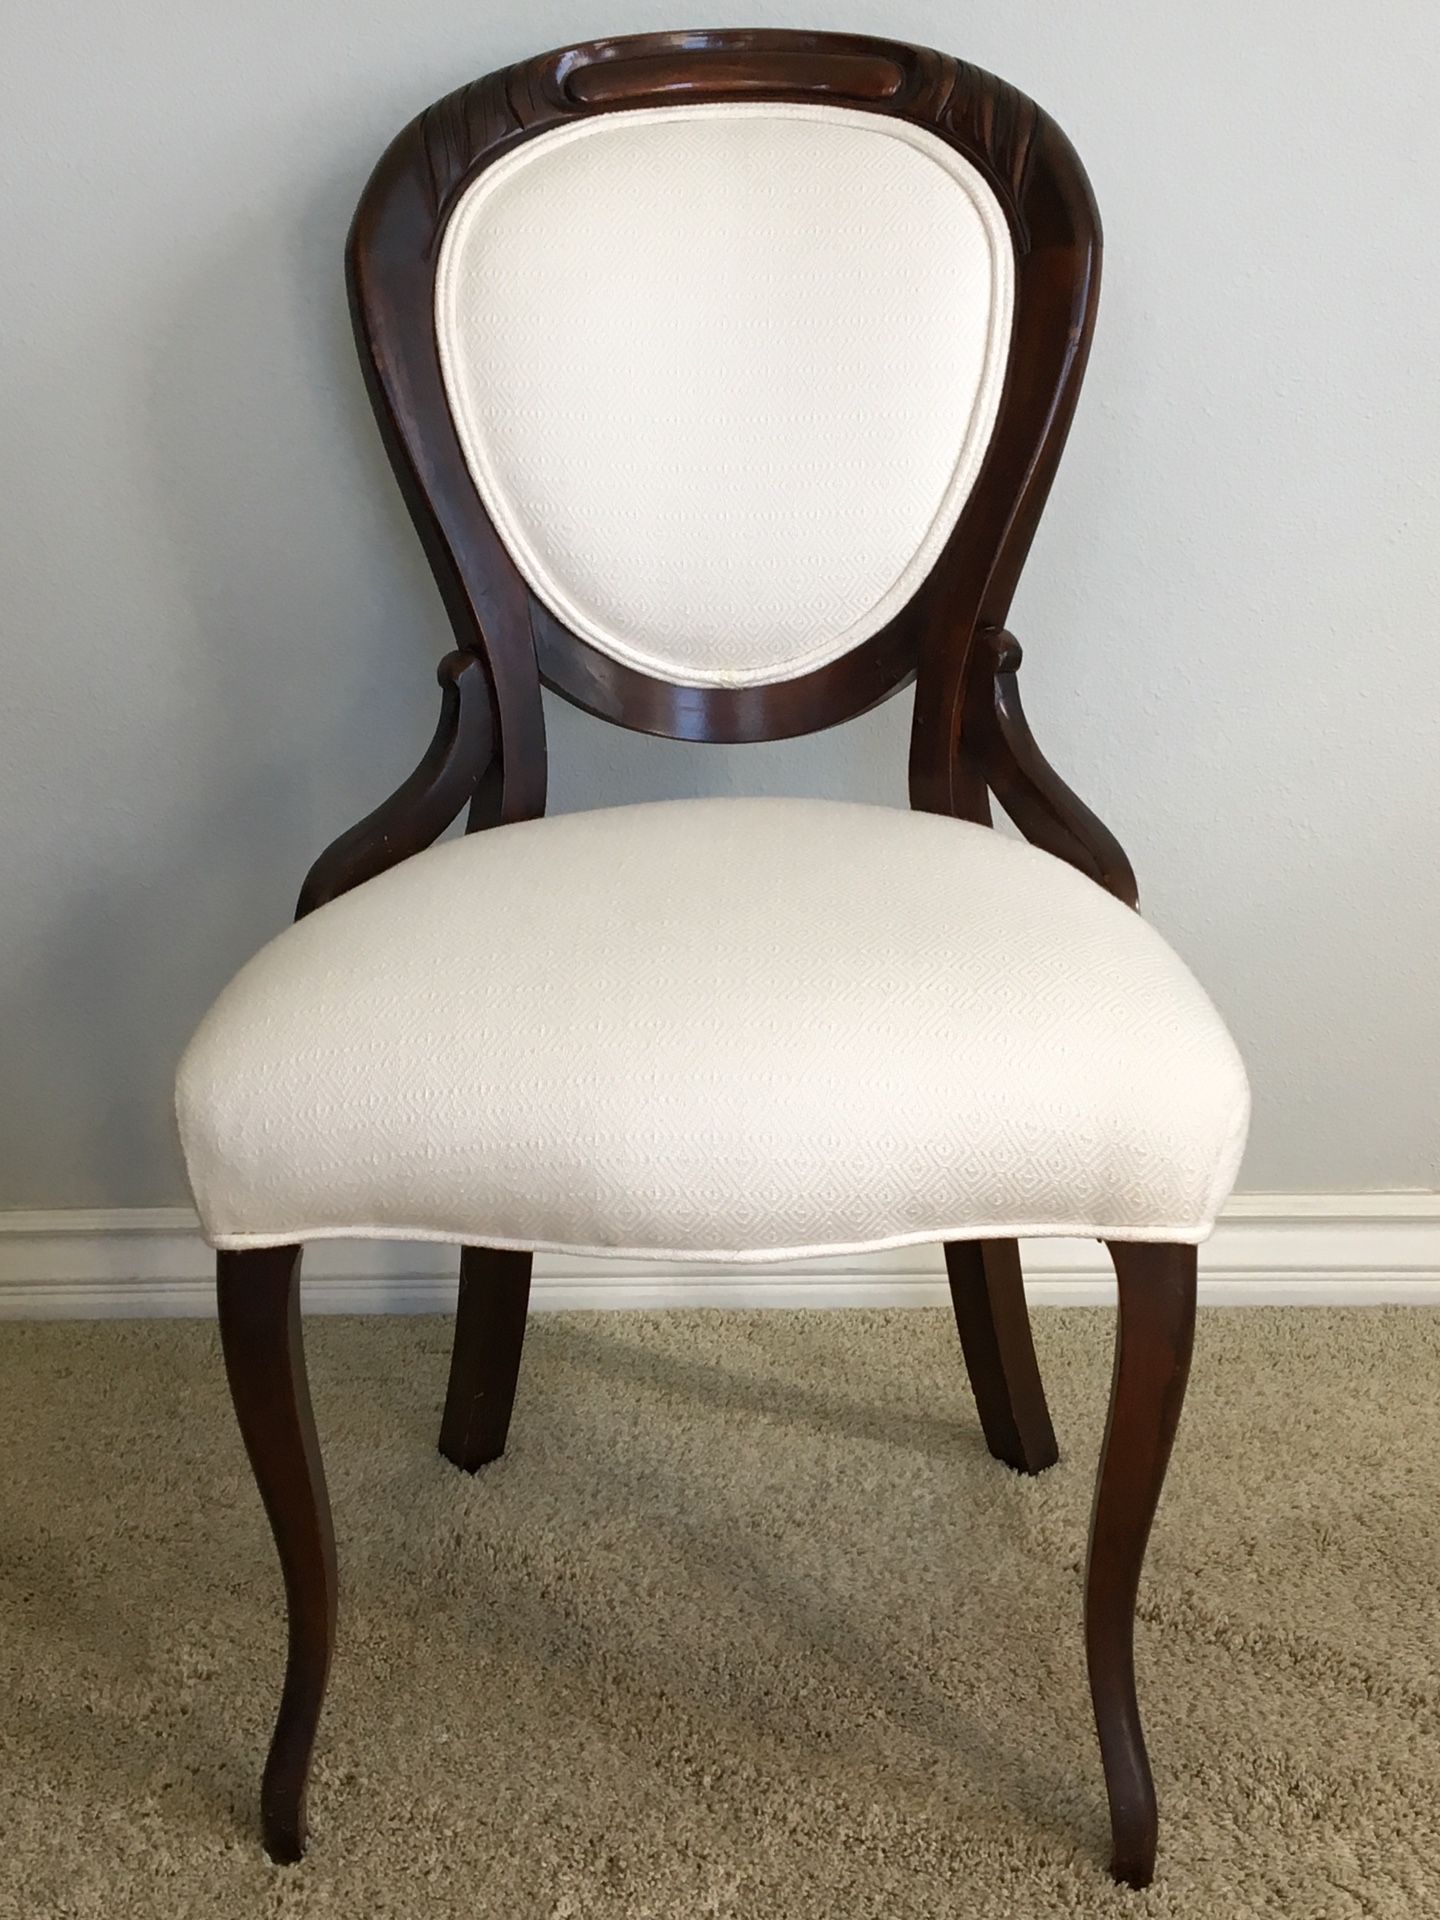 Vintage and refurbished Victorian style chair